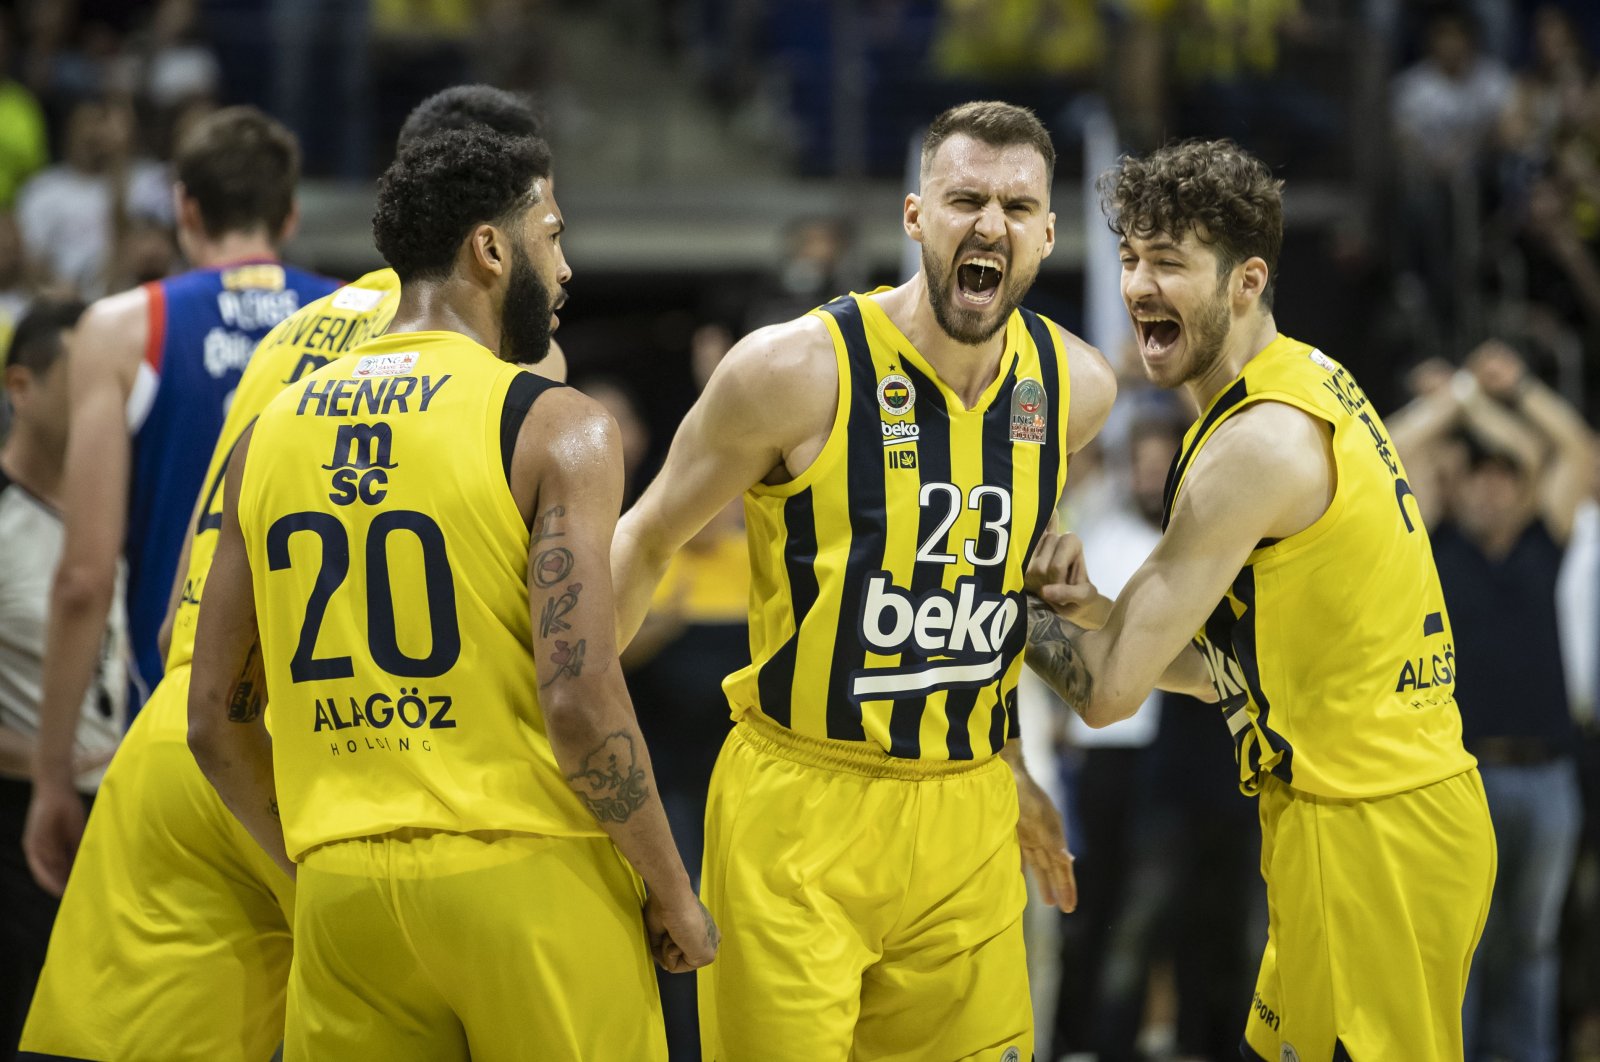 Fenerbahçe players celebrate a point against Anadolu Efes in the Basketball Süper Lig playoff finals, Istanbul, Turkey, June 9, 2022. (AA Photo)